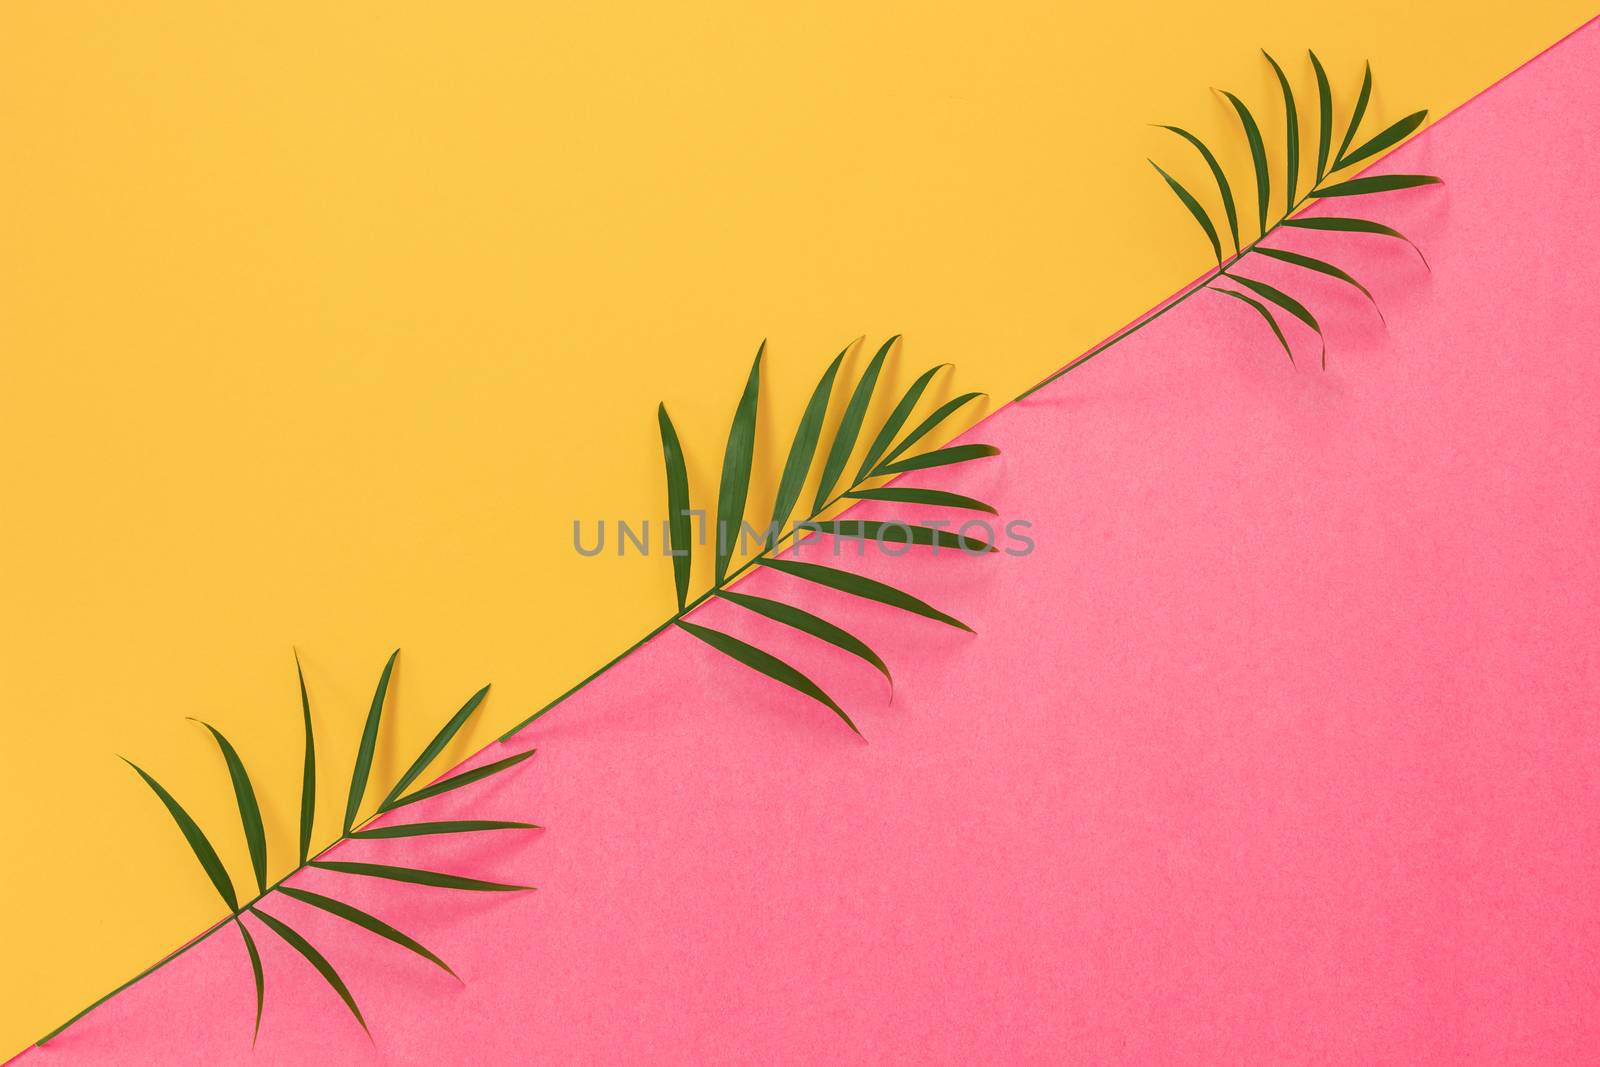 Palm leaves on colorful yellow and pink background by anikasalsera